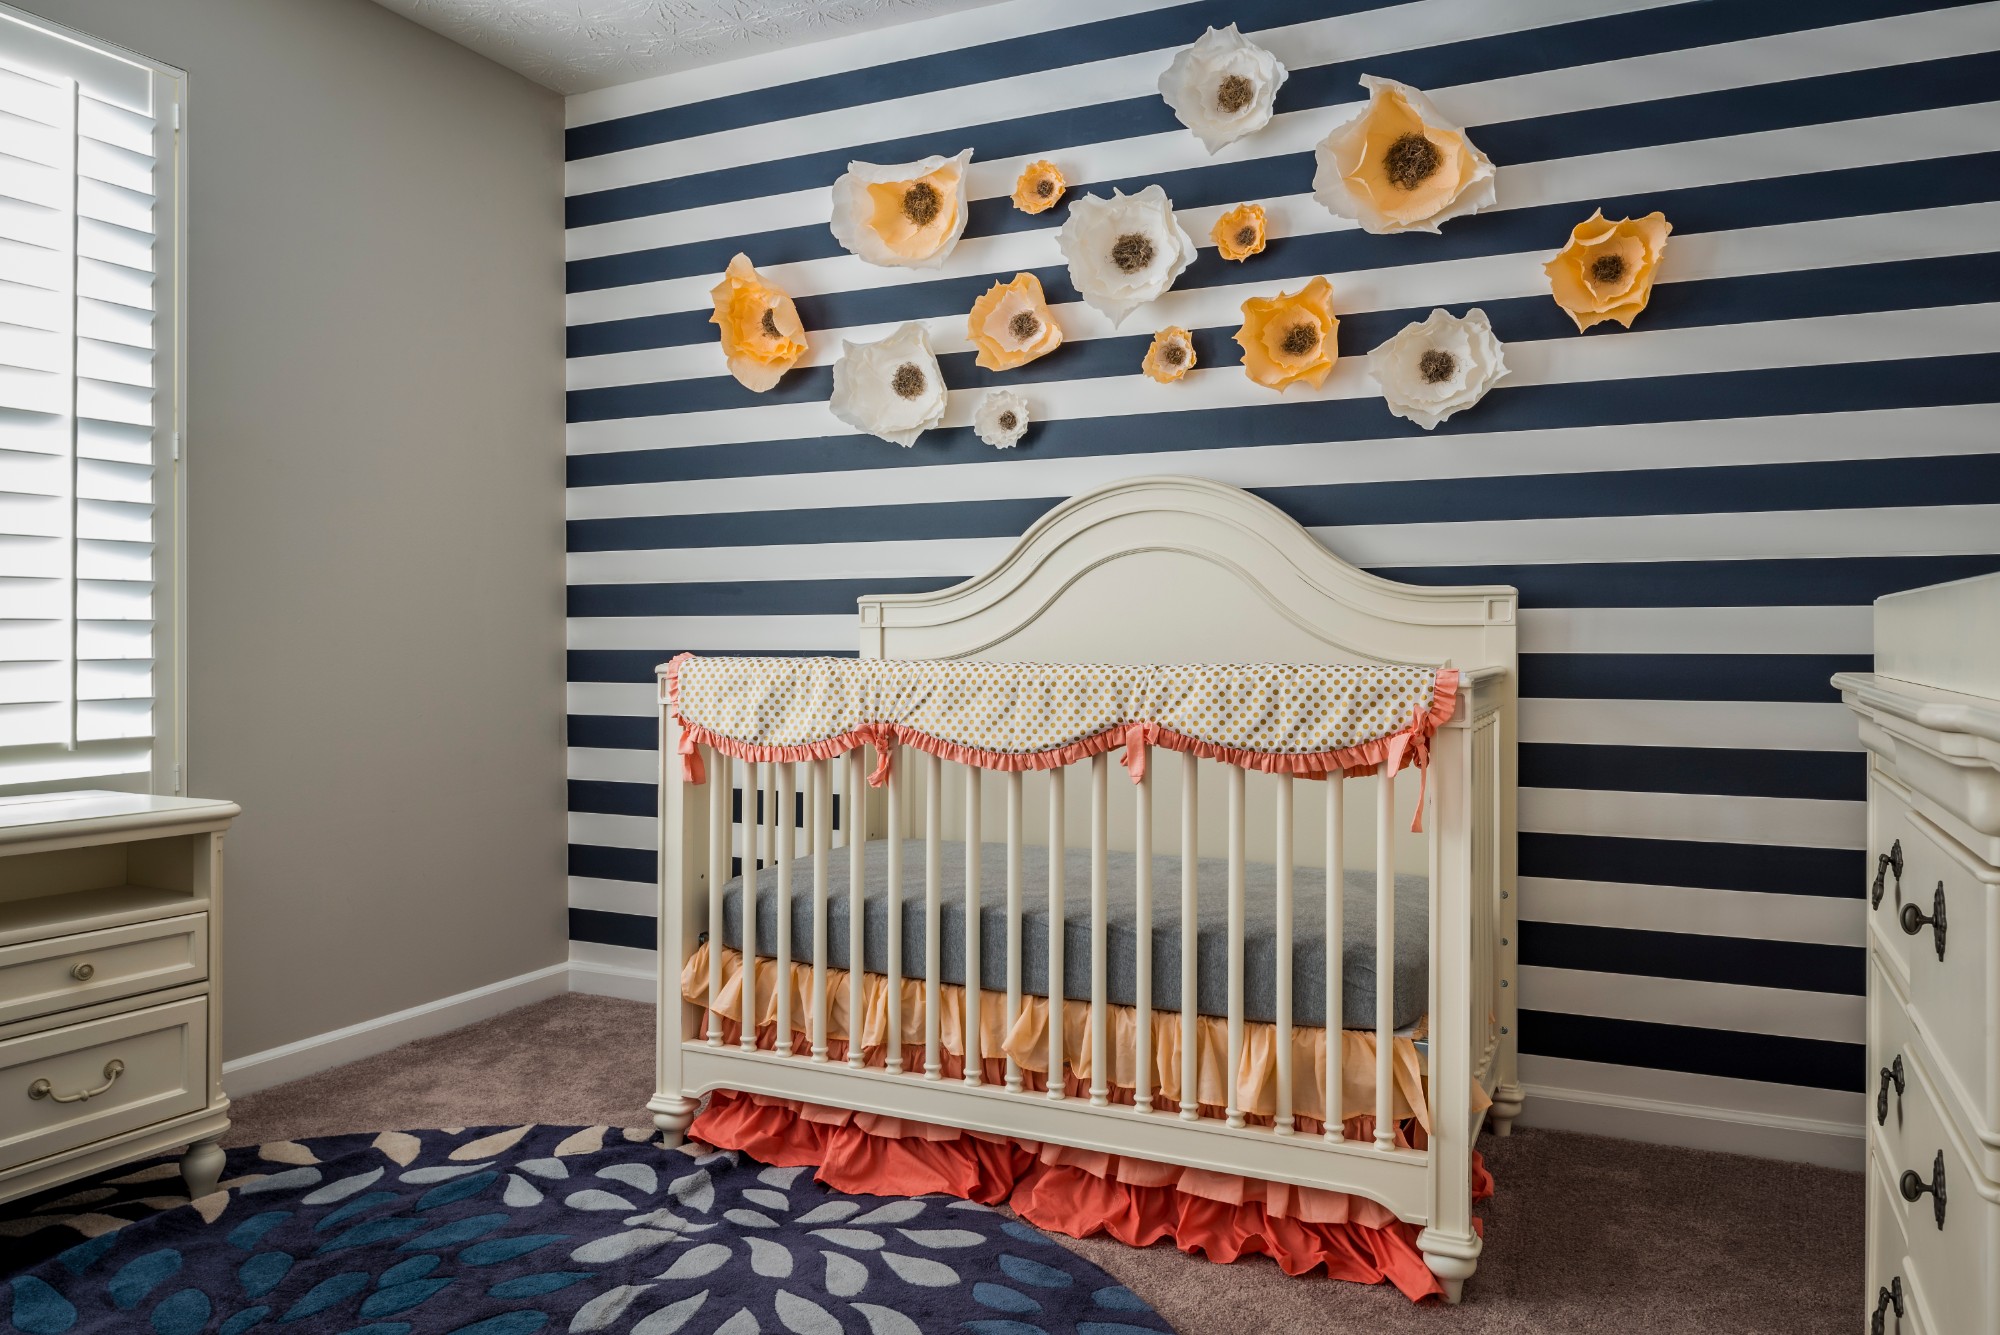 A photo of a colorful and playful nursery room with a crib and and changing table.